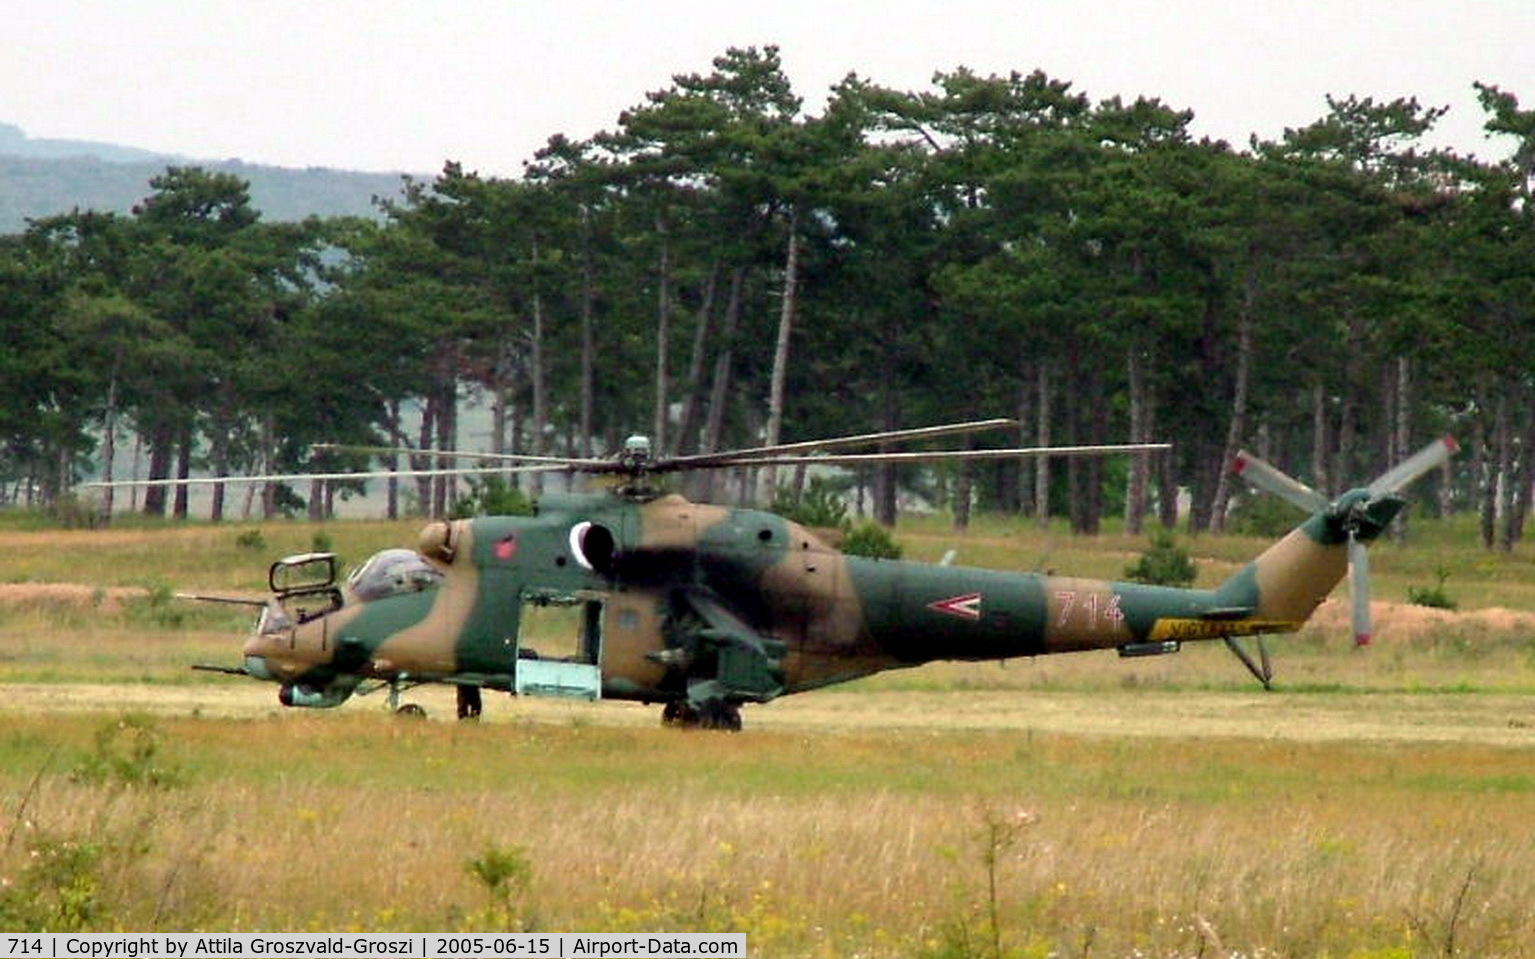 714, 1985 Mil Mi-24V Hind E C/N K220714, Veszprém-Ujmajor temporary army helicopter base. At this time yet his old, martial pattern